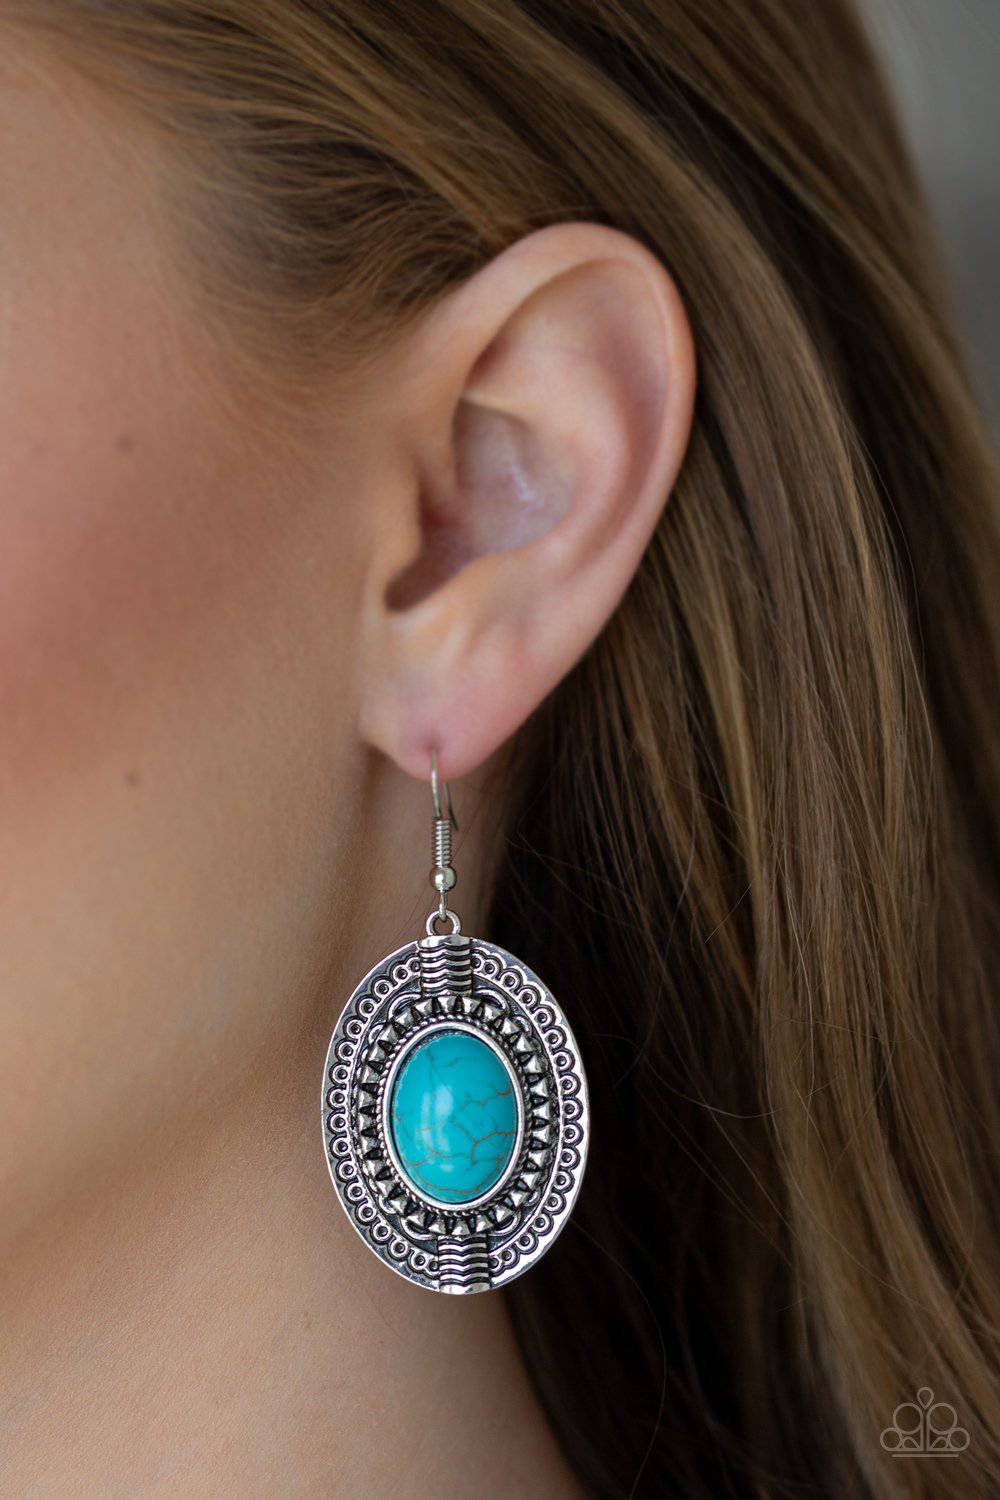 Mountain Melody - Blue Turquoise Stone Earrings - Paparazzi Accessories - GlaMarous Titi Jewels